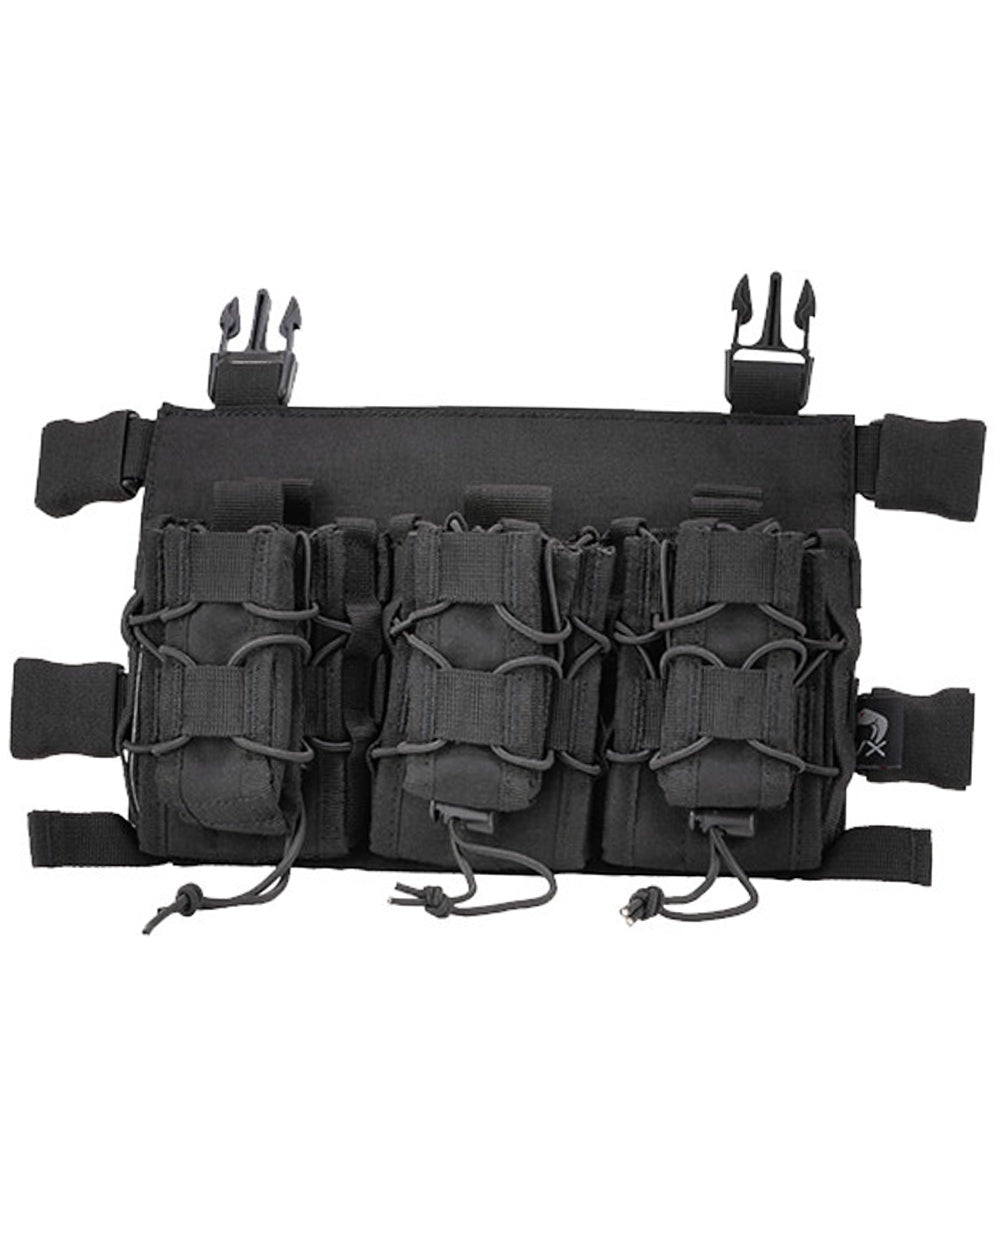 Viper VX Buckle Up Mag Rig in Black 